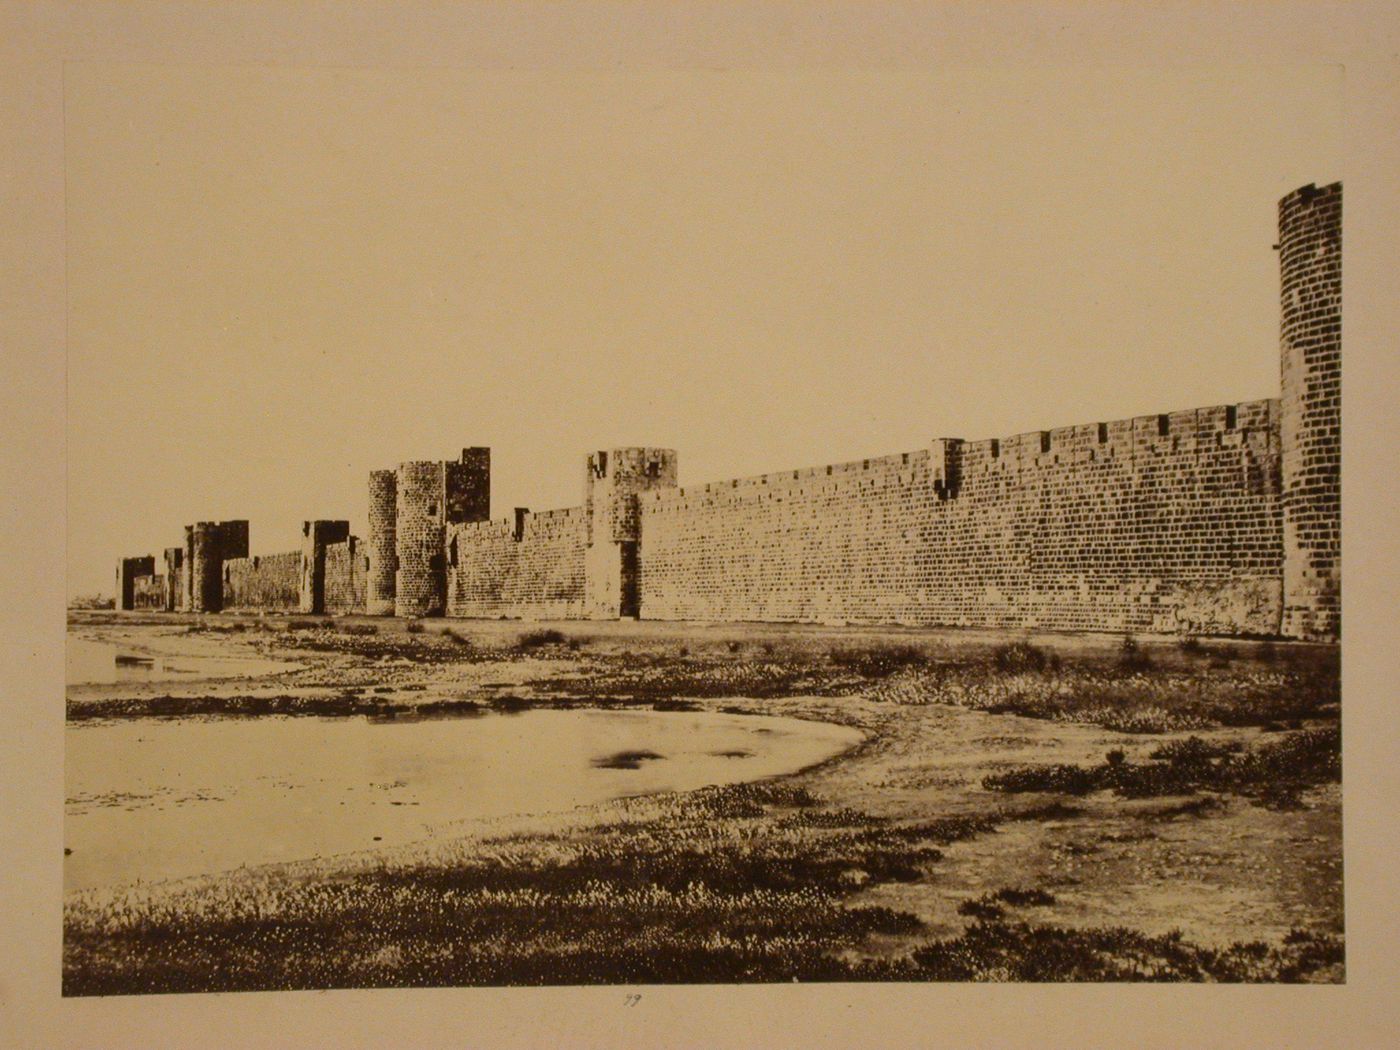 View along the city wall showing towers, Aigues-Mortes, France